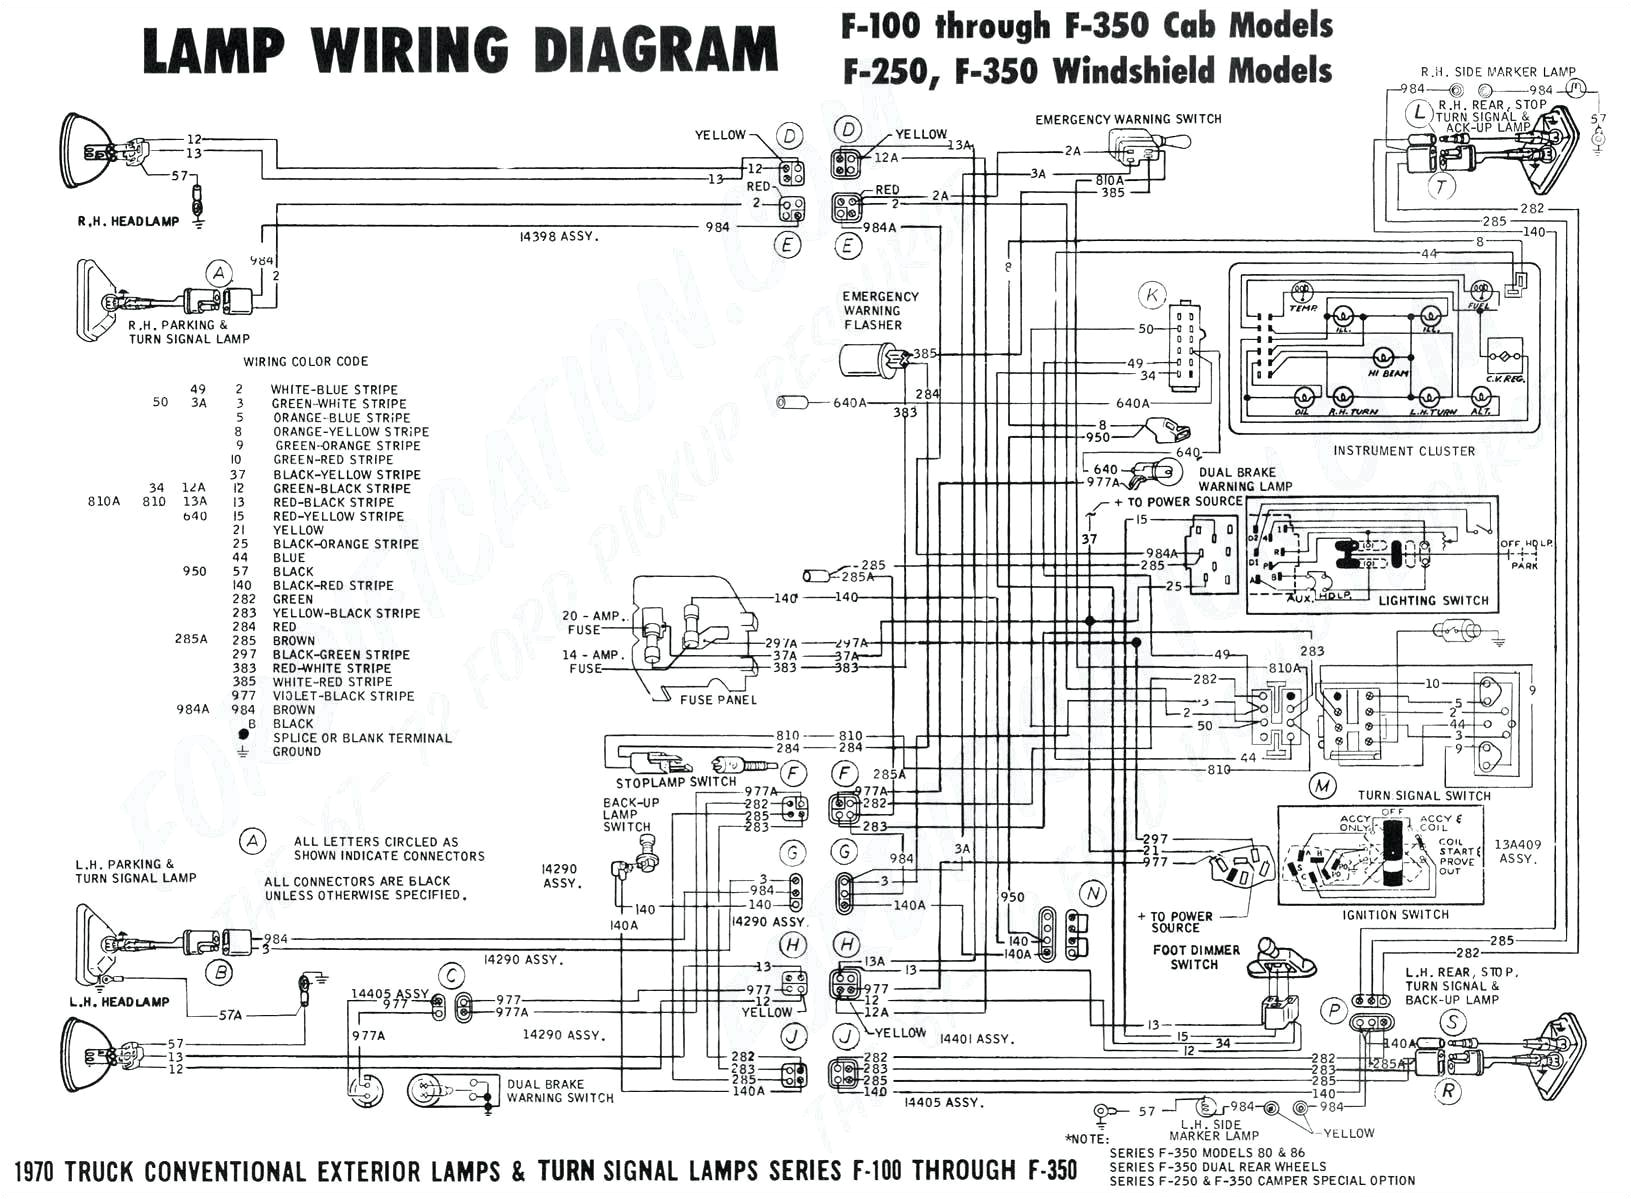 rc car receiver wiring diagram awesome rc wiring diagram wire datarc car receiver wiring diagram inspirational